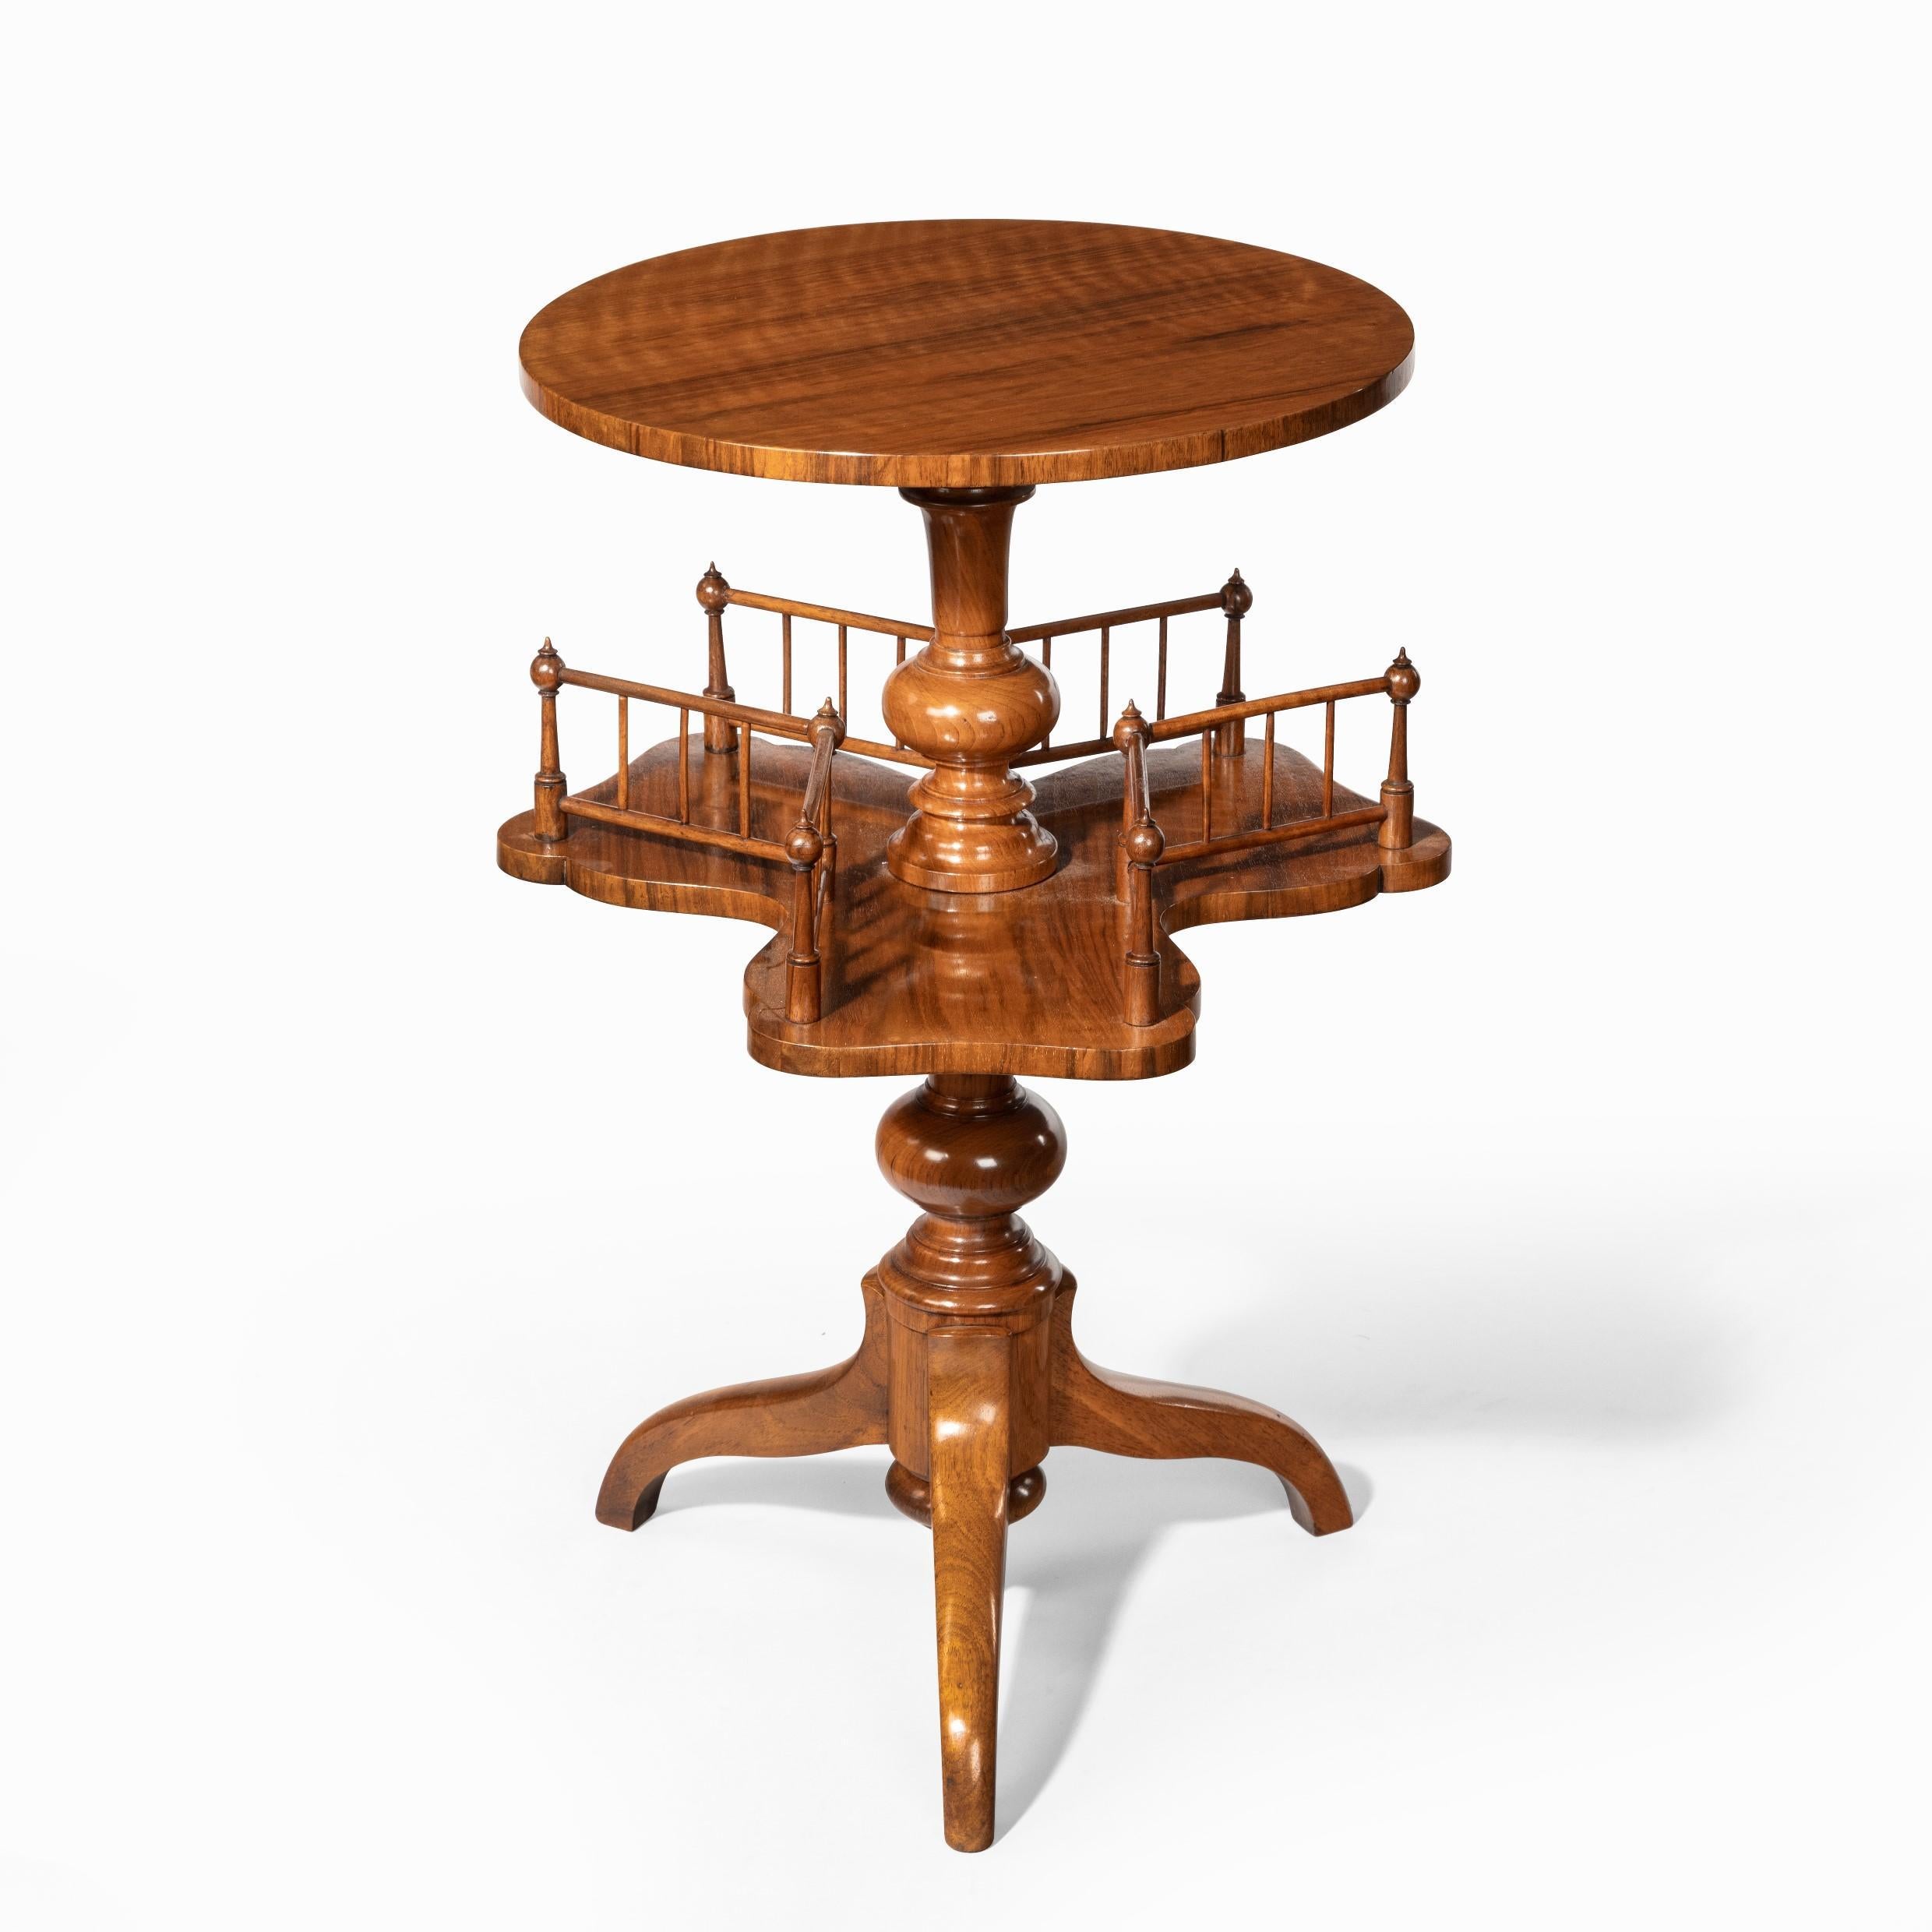 A Victorian walnut revolving book table, of typical form with a circular top above three shaped open book-shelves which revolve around a central turned support, all raised on three down-swept legs. English, 1880.